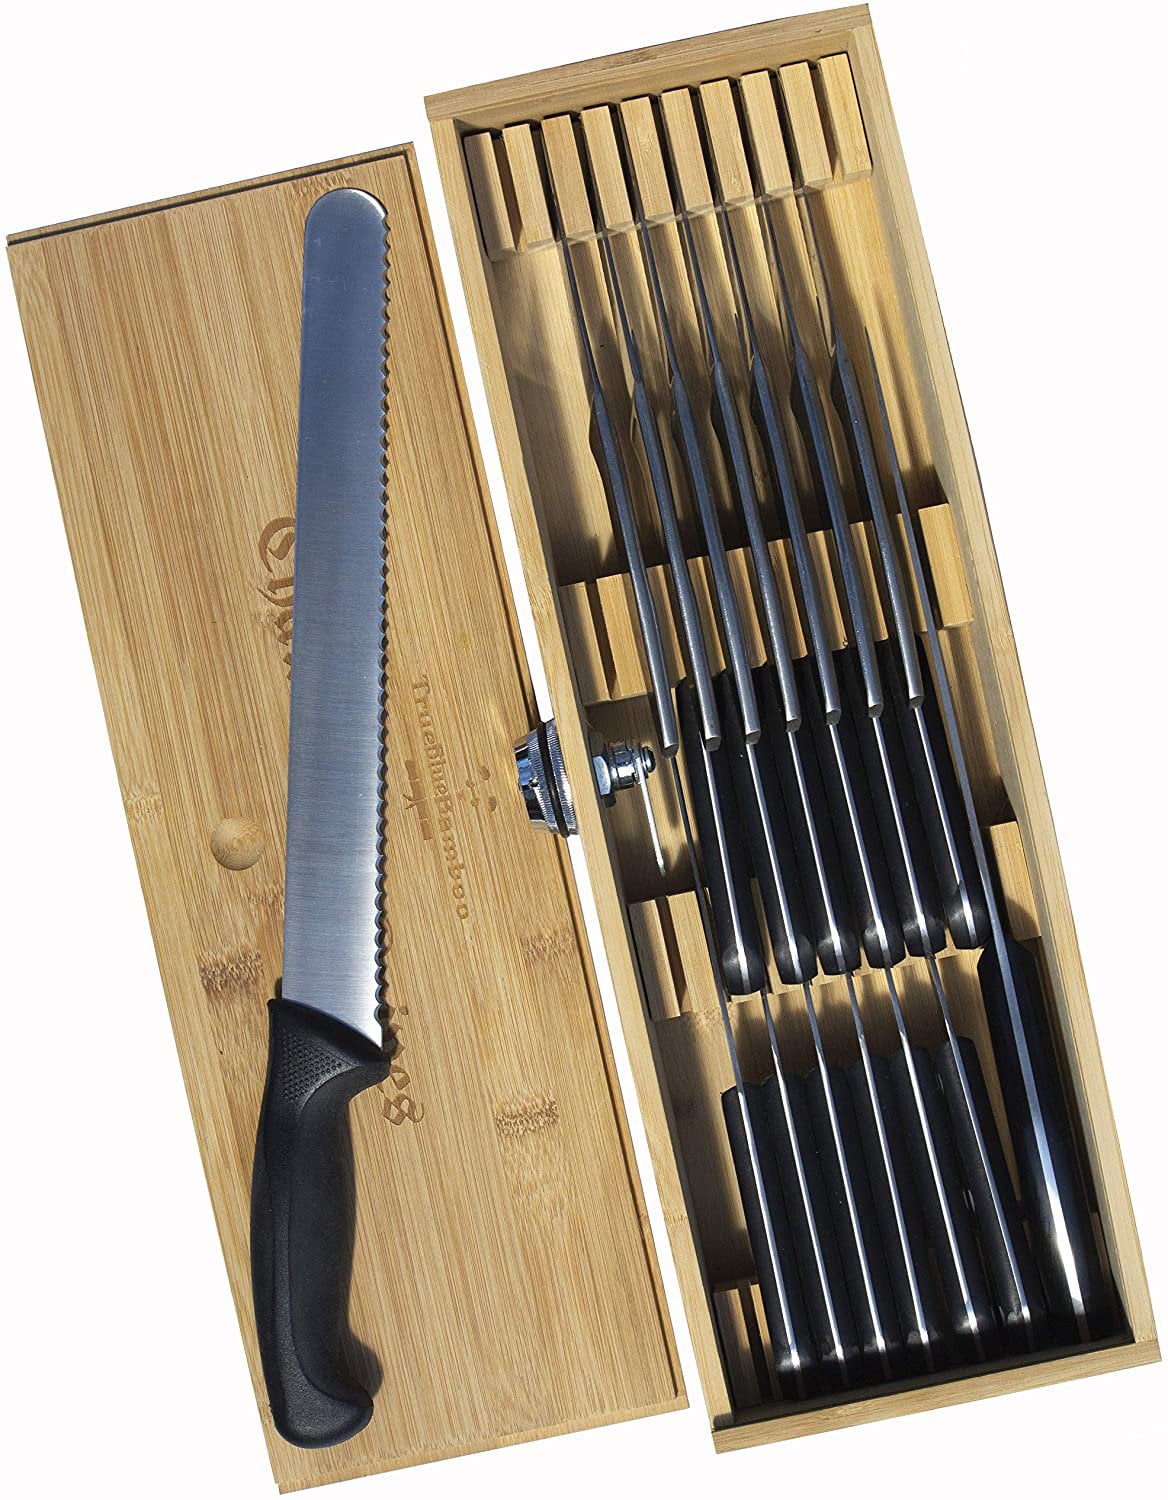 In Drawer Bamboo Chef Knives/Kitchen Knives Organizer Box - with